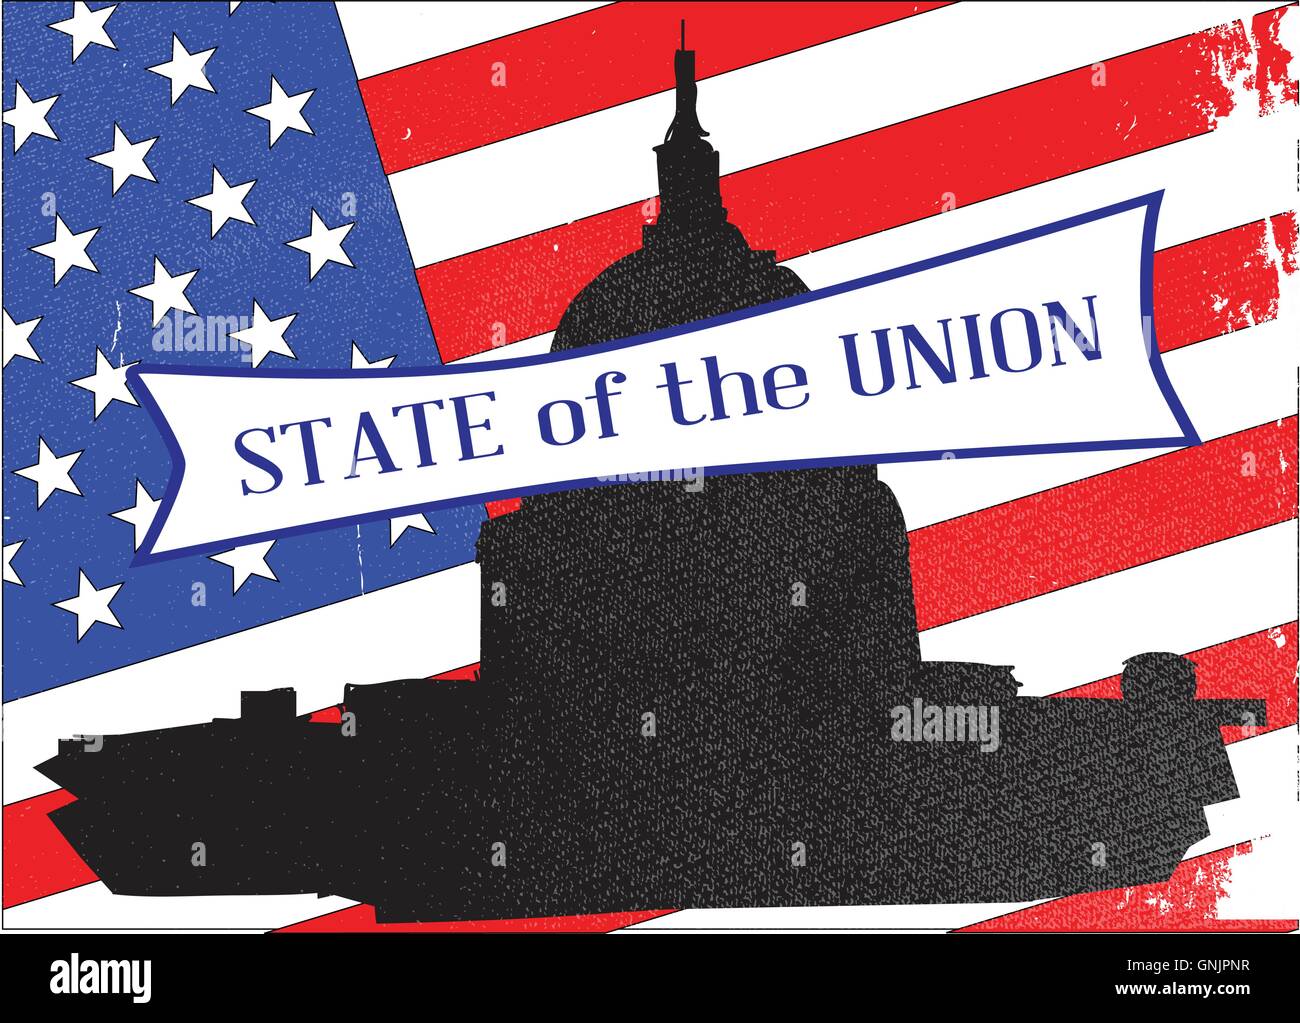 Washington State of the Union Stock Vector